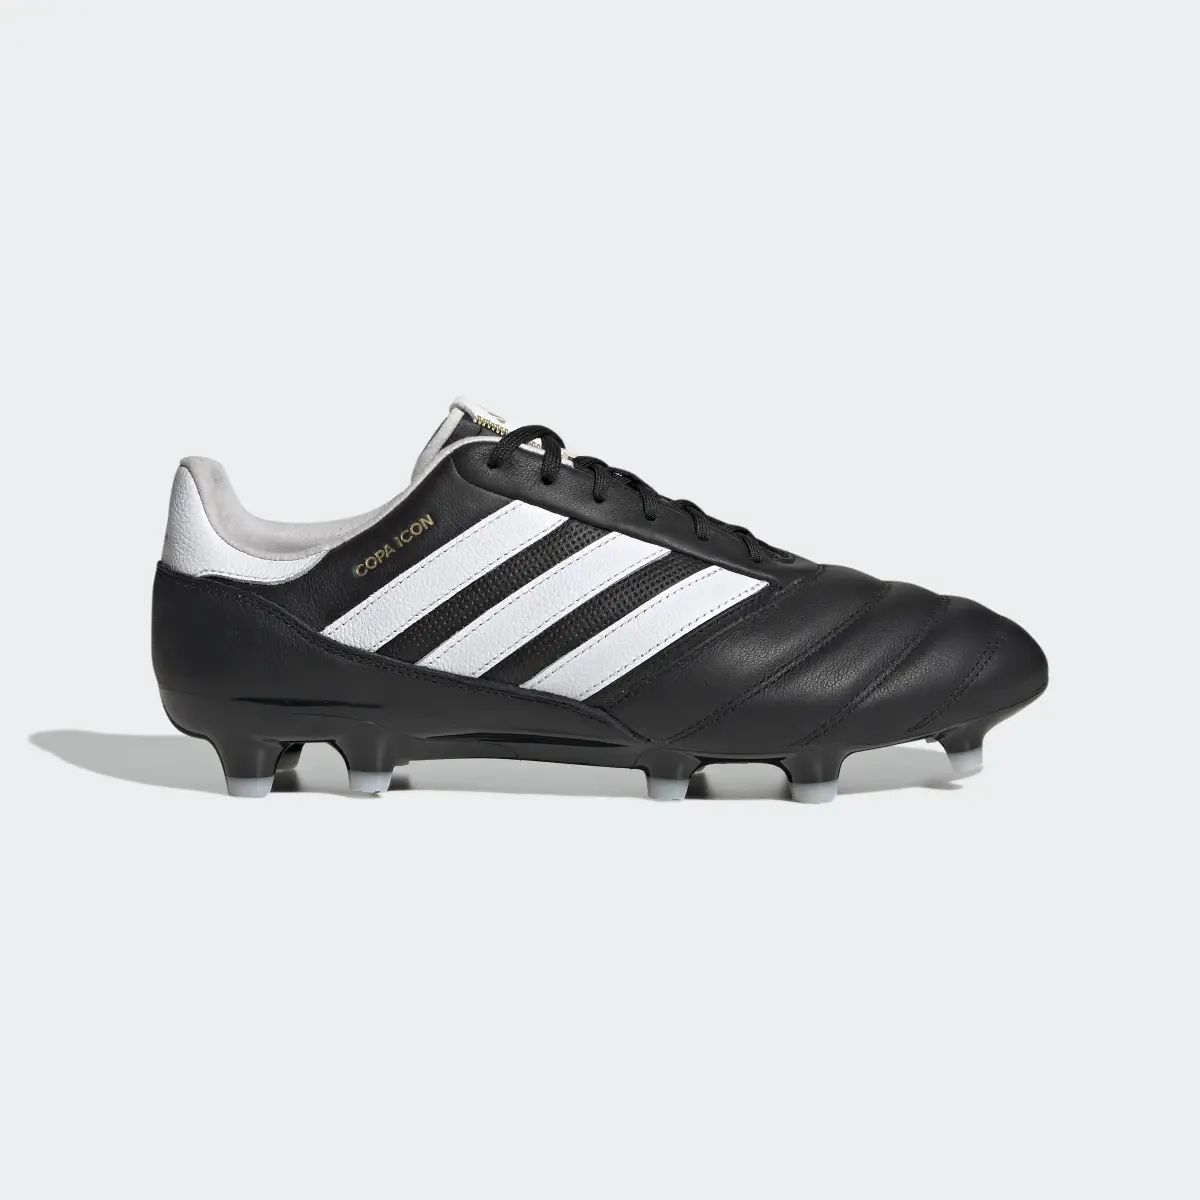 Adidas Copa Icon Firm Ground Soccer Cleats. 2